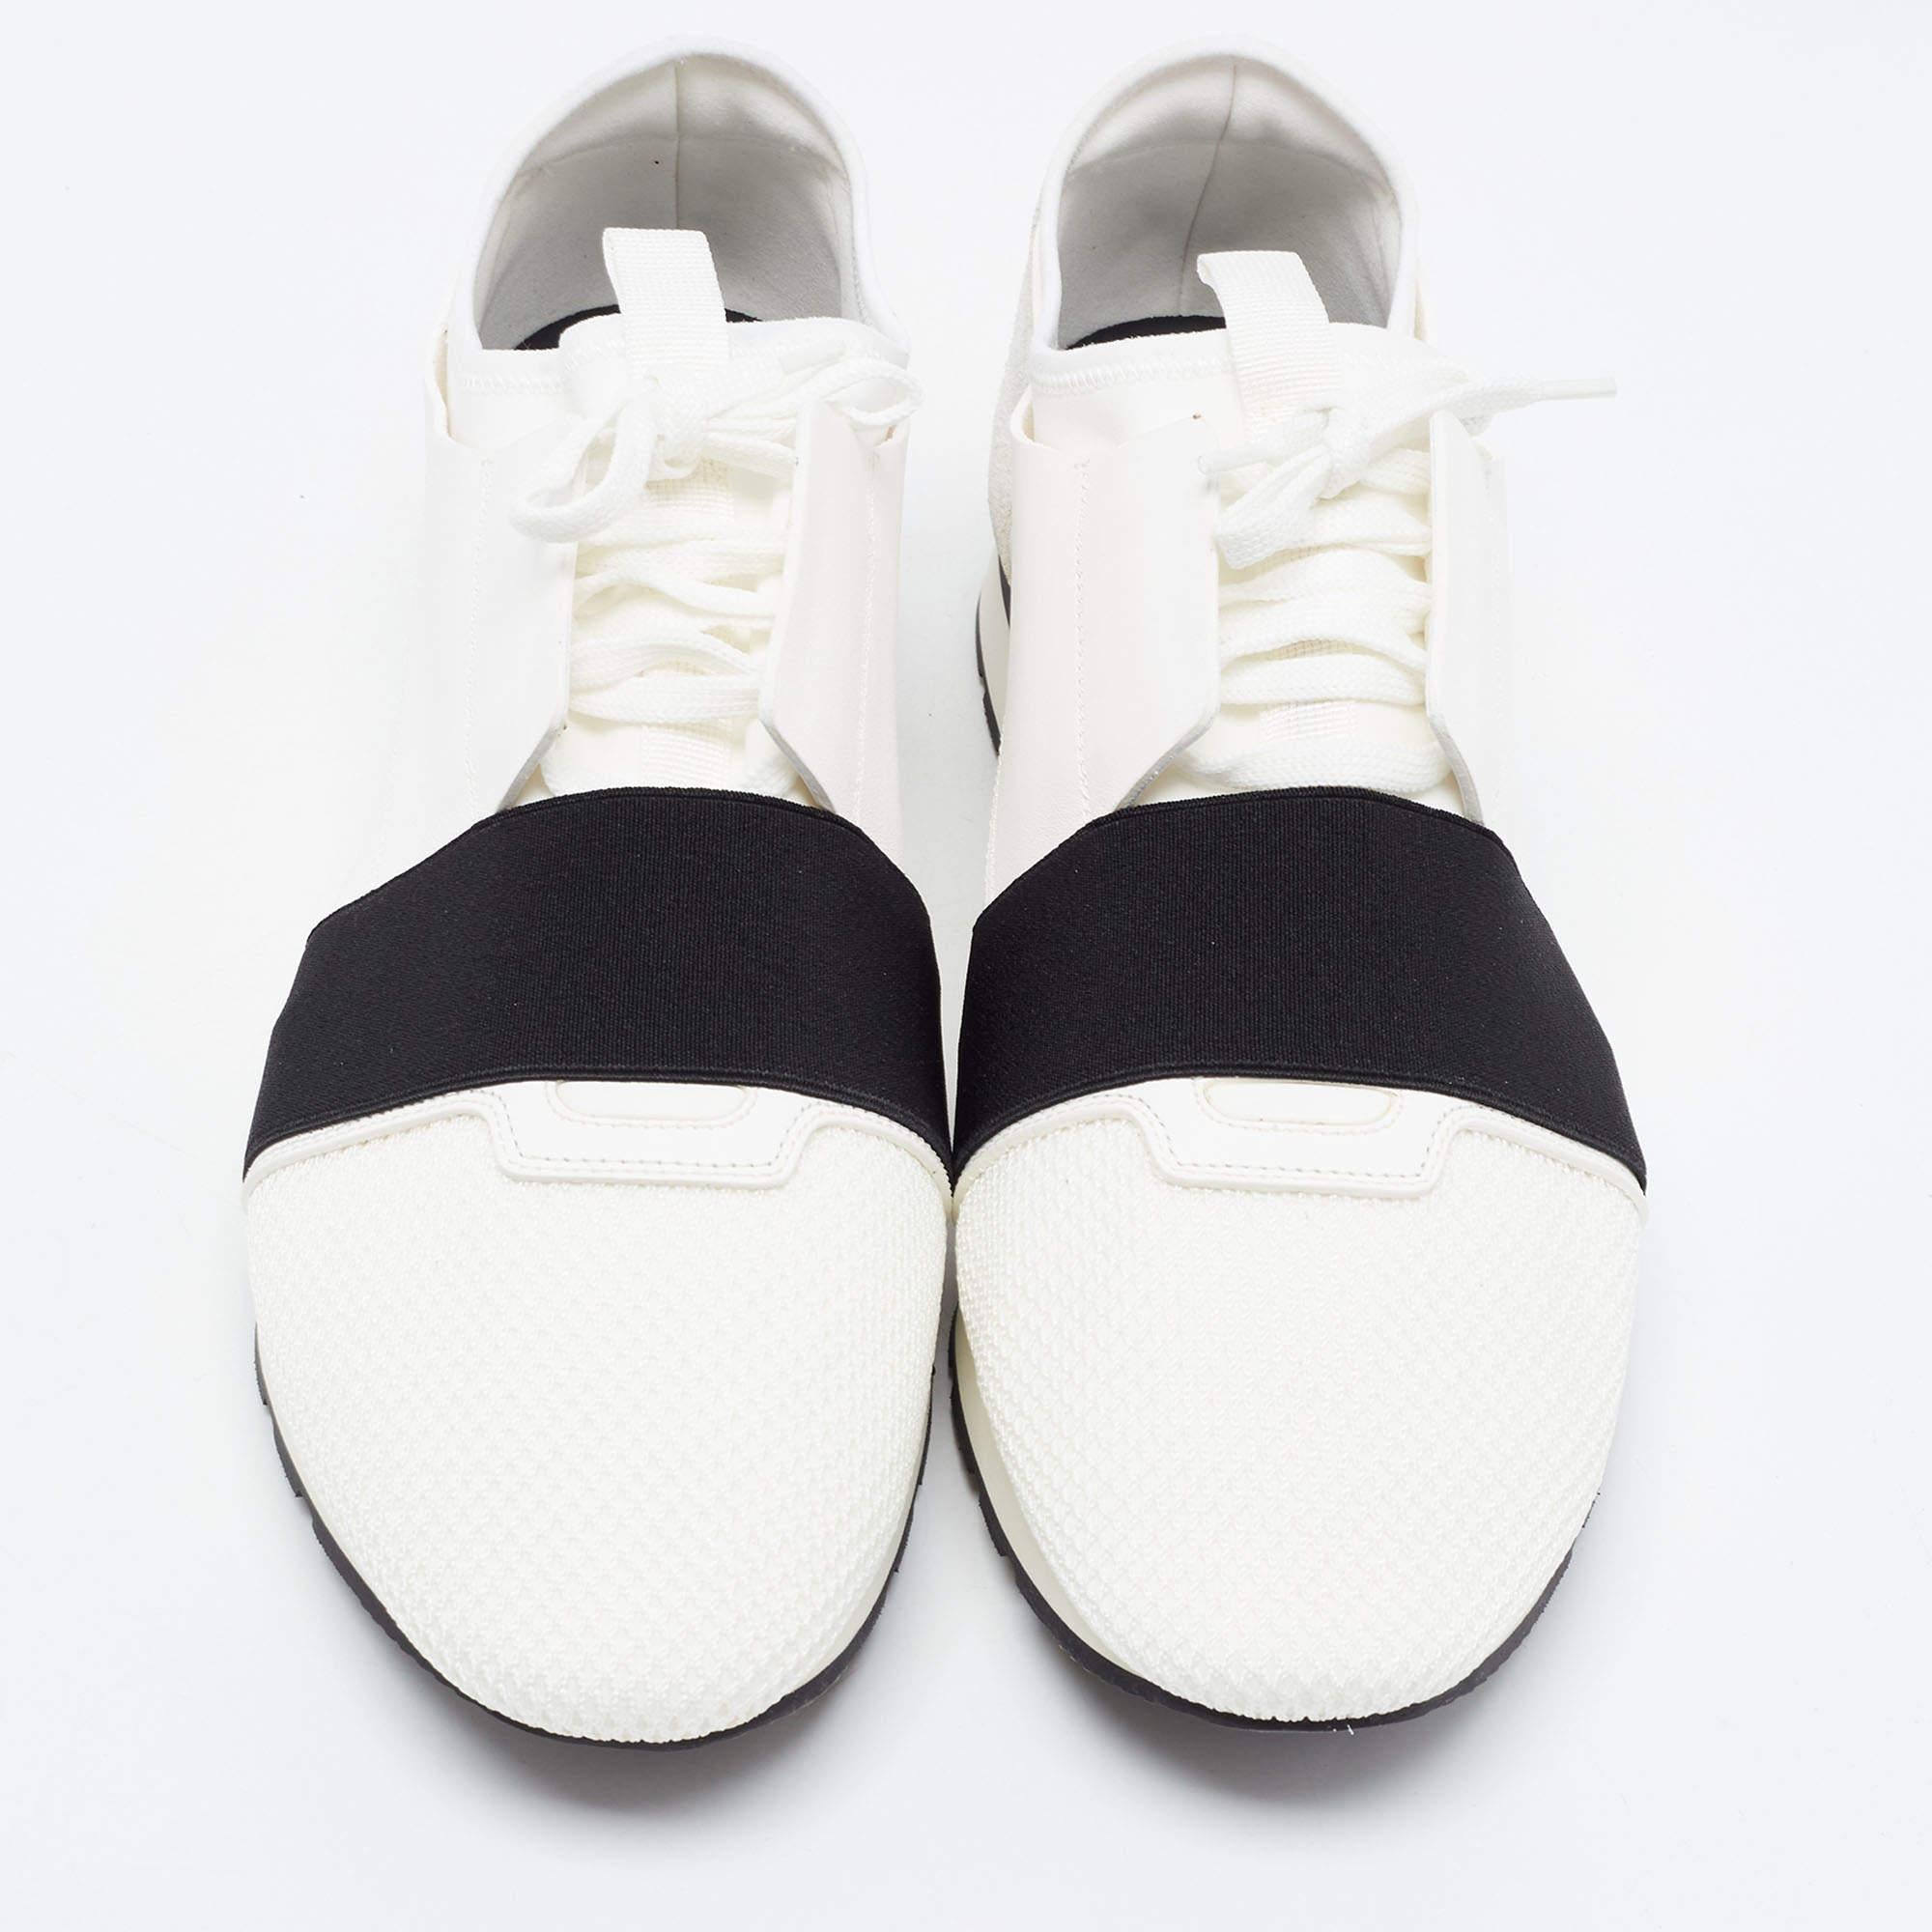 Coming in a classic silhouette, these designer sneakers are a seamless combination of luxury, comfort, and style. These Balenciaga sneakers are designed with signature details and comfortable insoles.

Includes
Original Dustbag, Original Box, Info